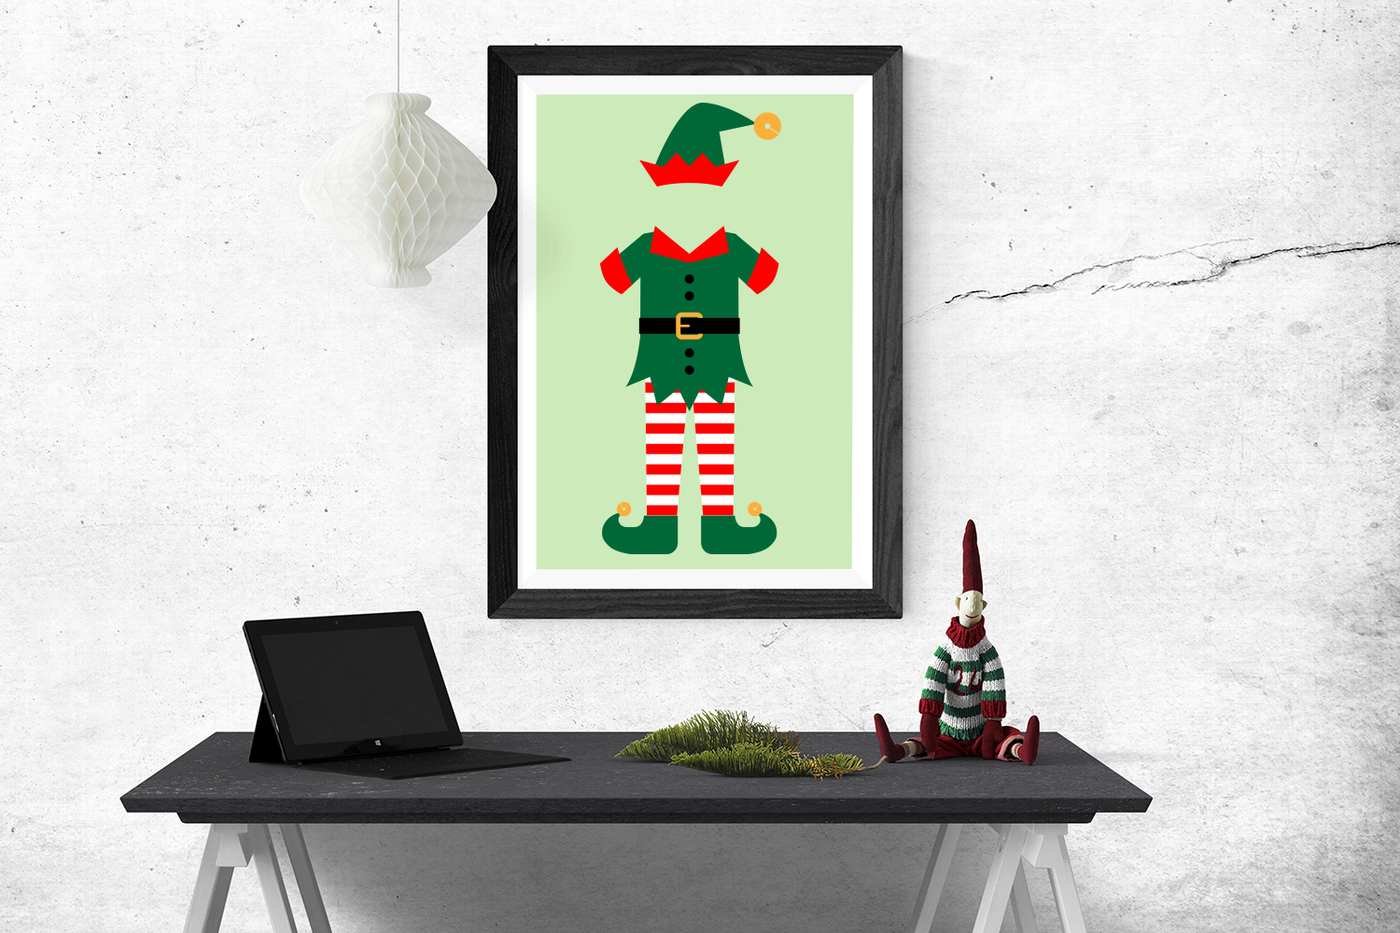 Poster above a desk has an elf outfit design.